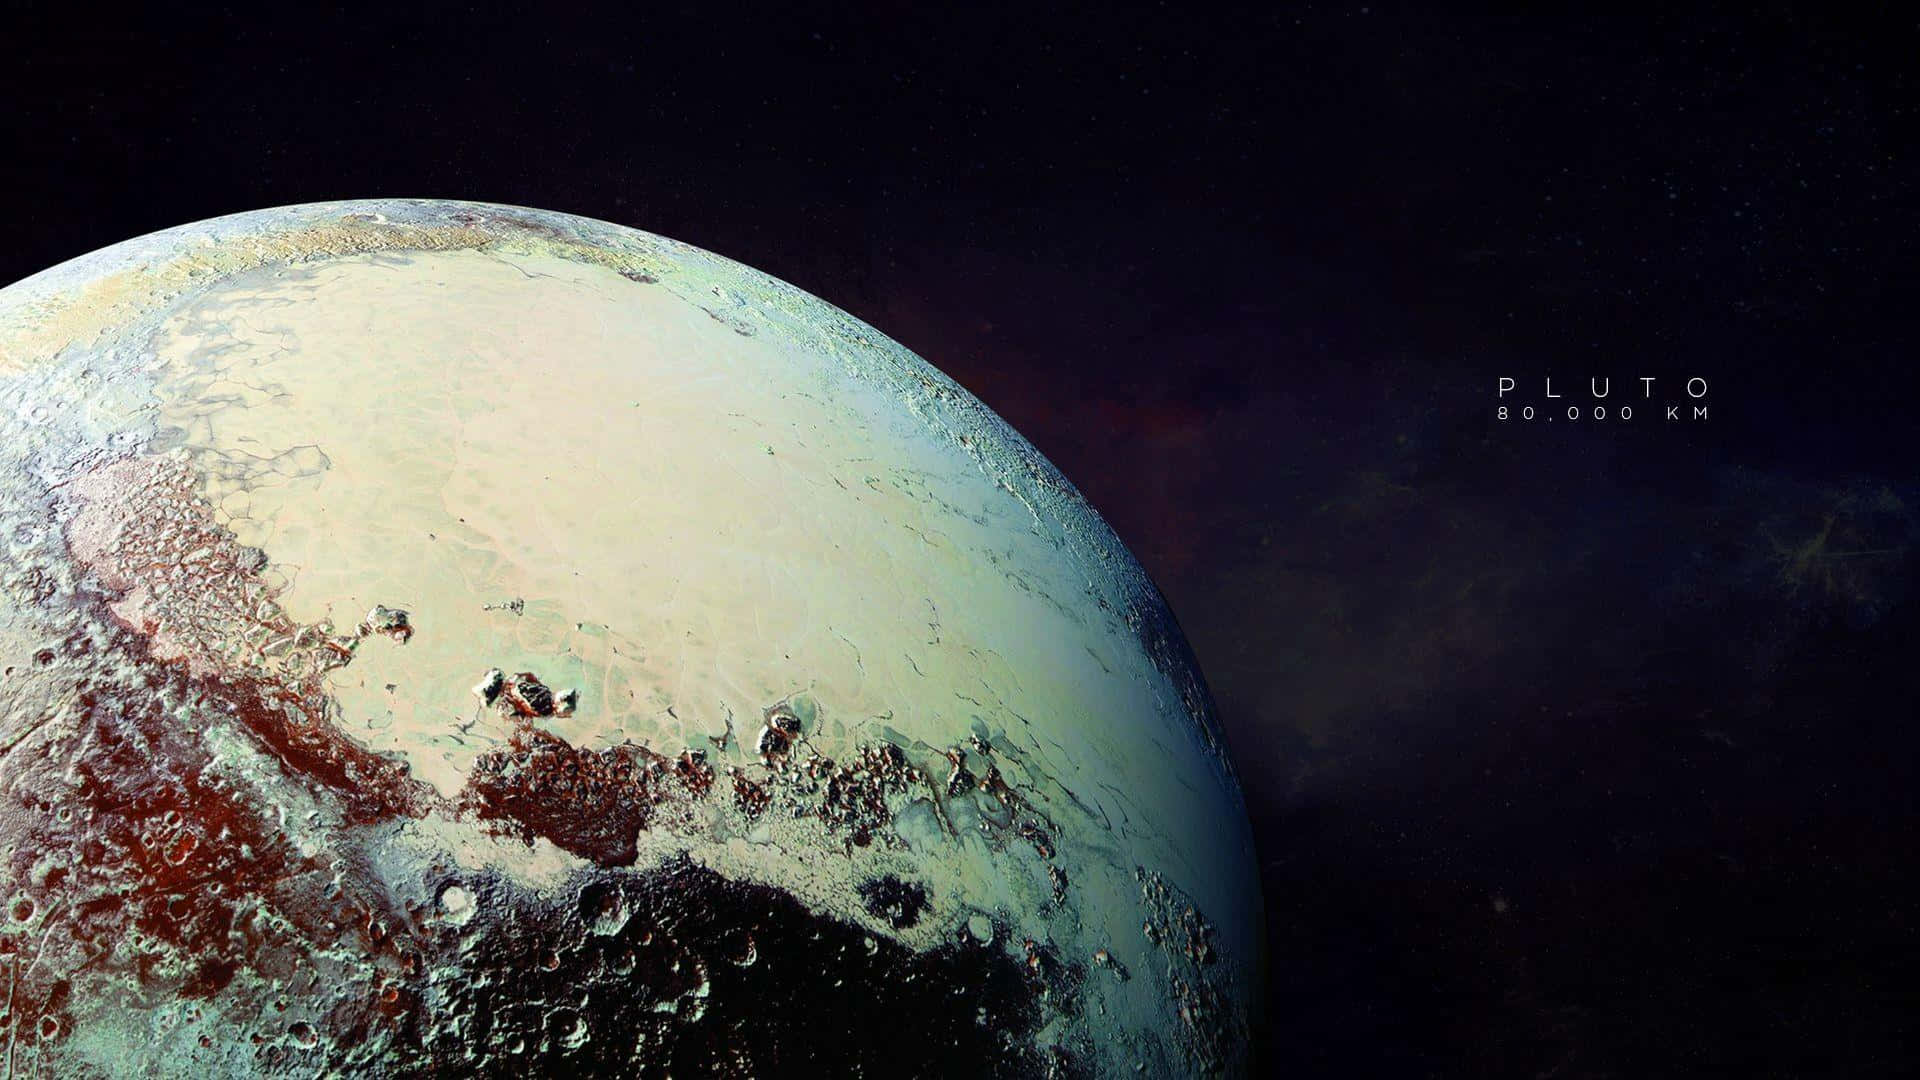 Pluto, an icy dwarf planet at the edge of the solar system